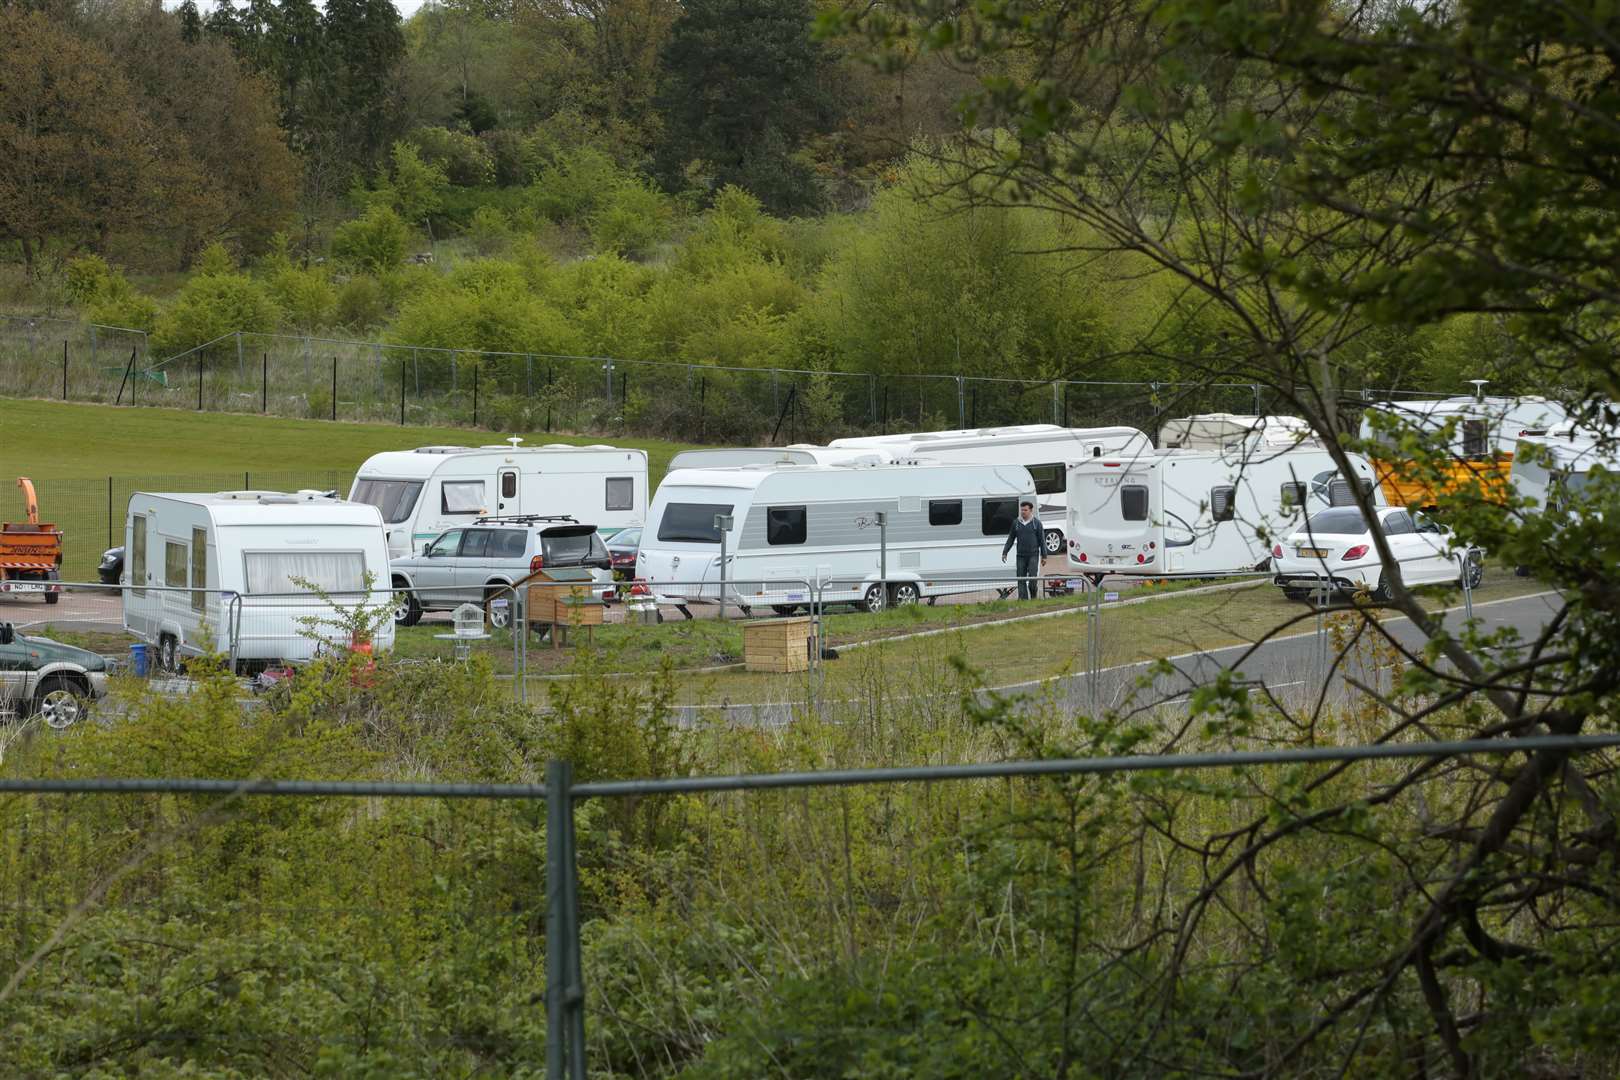 The travellers on the site in Platinum Way, St Mary's Platt